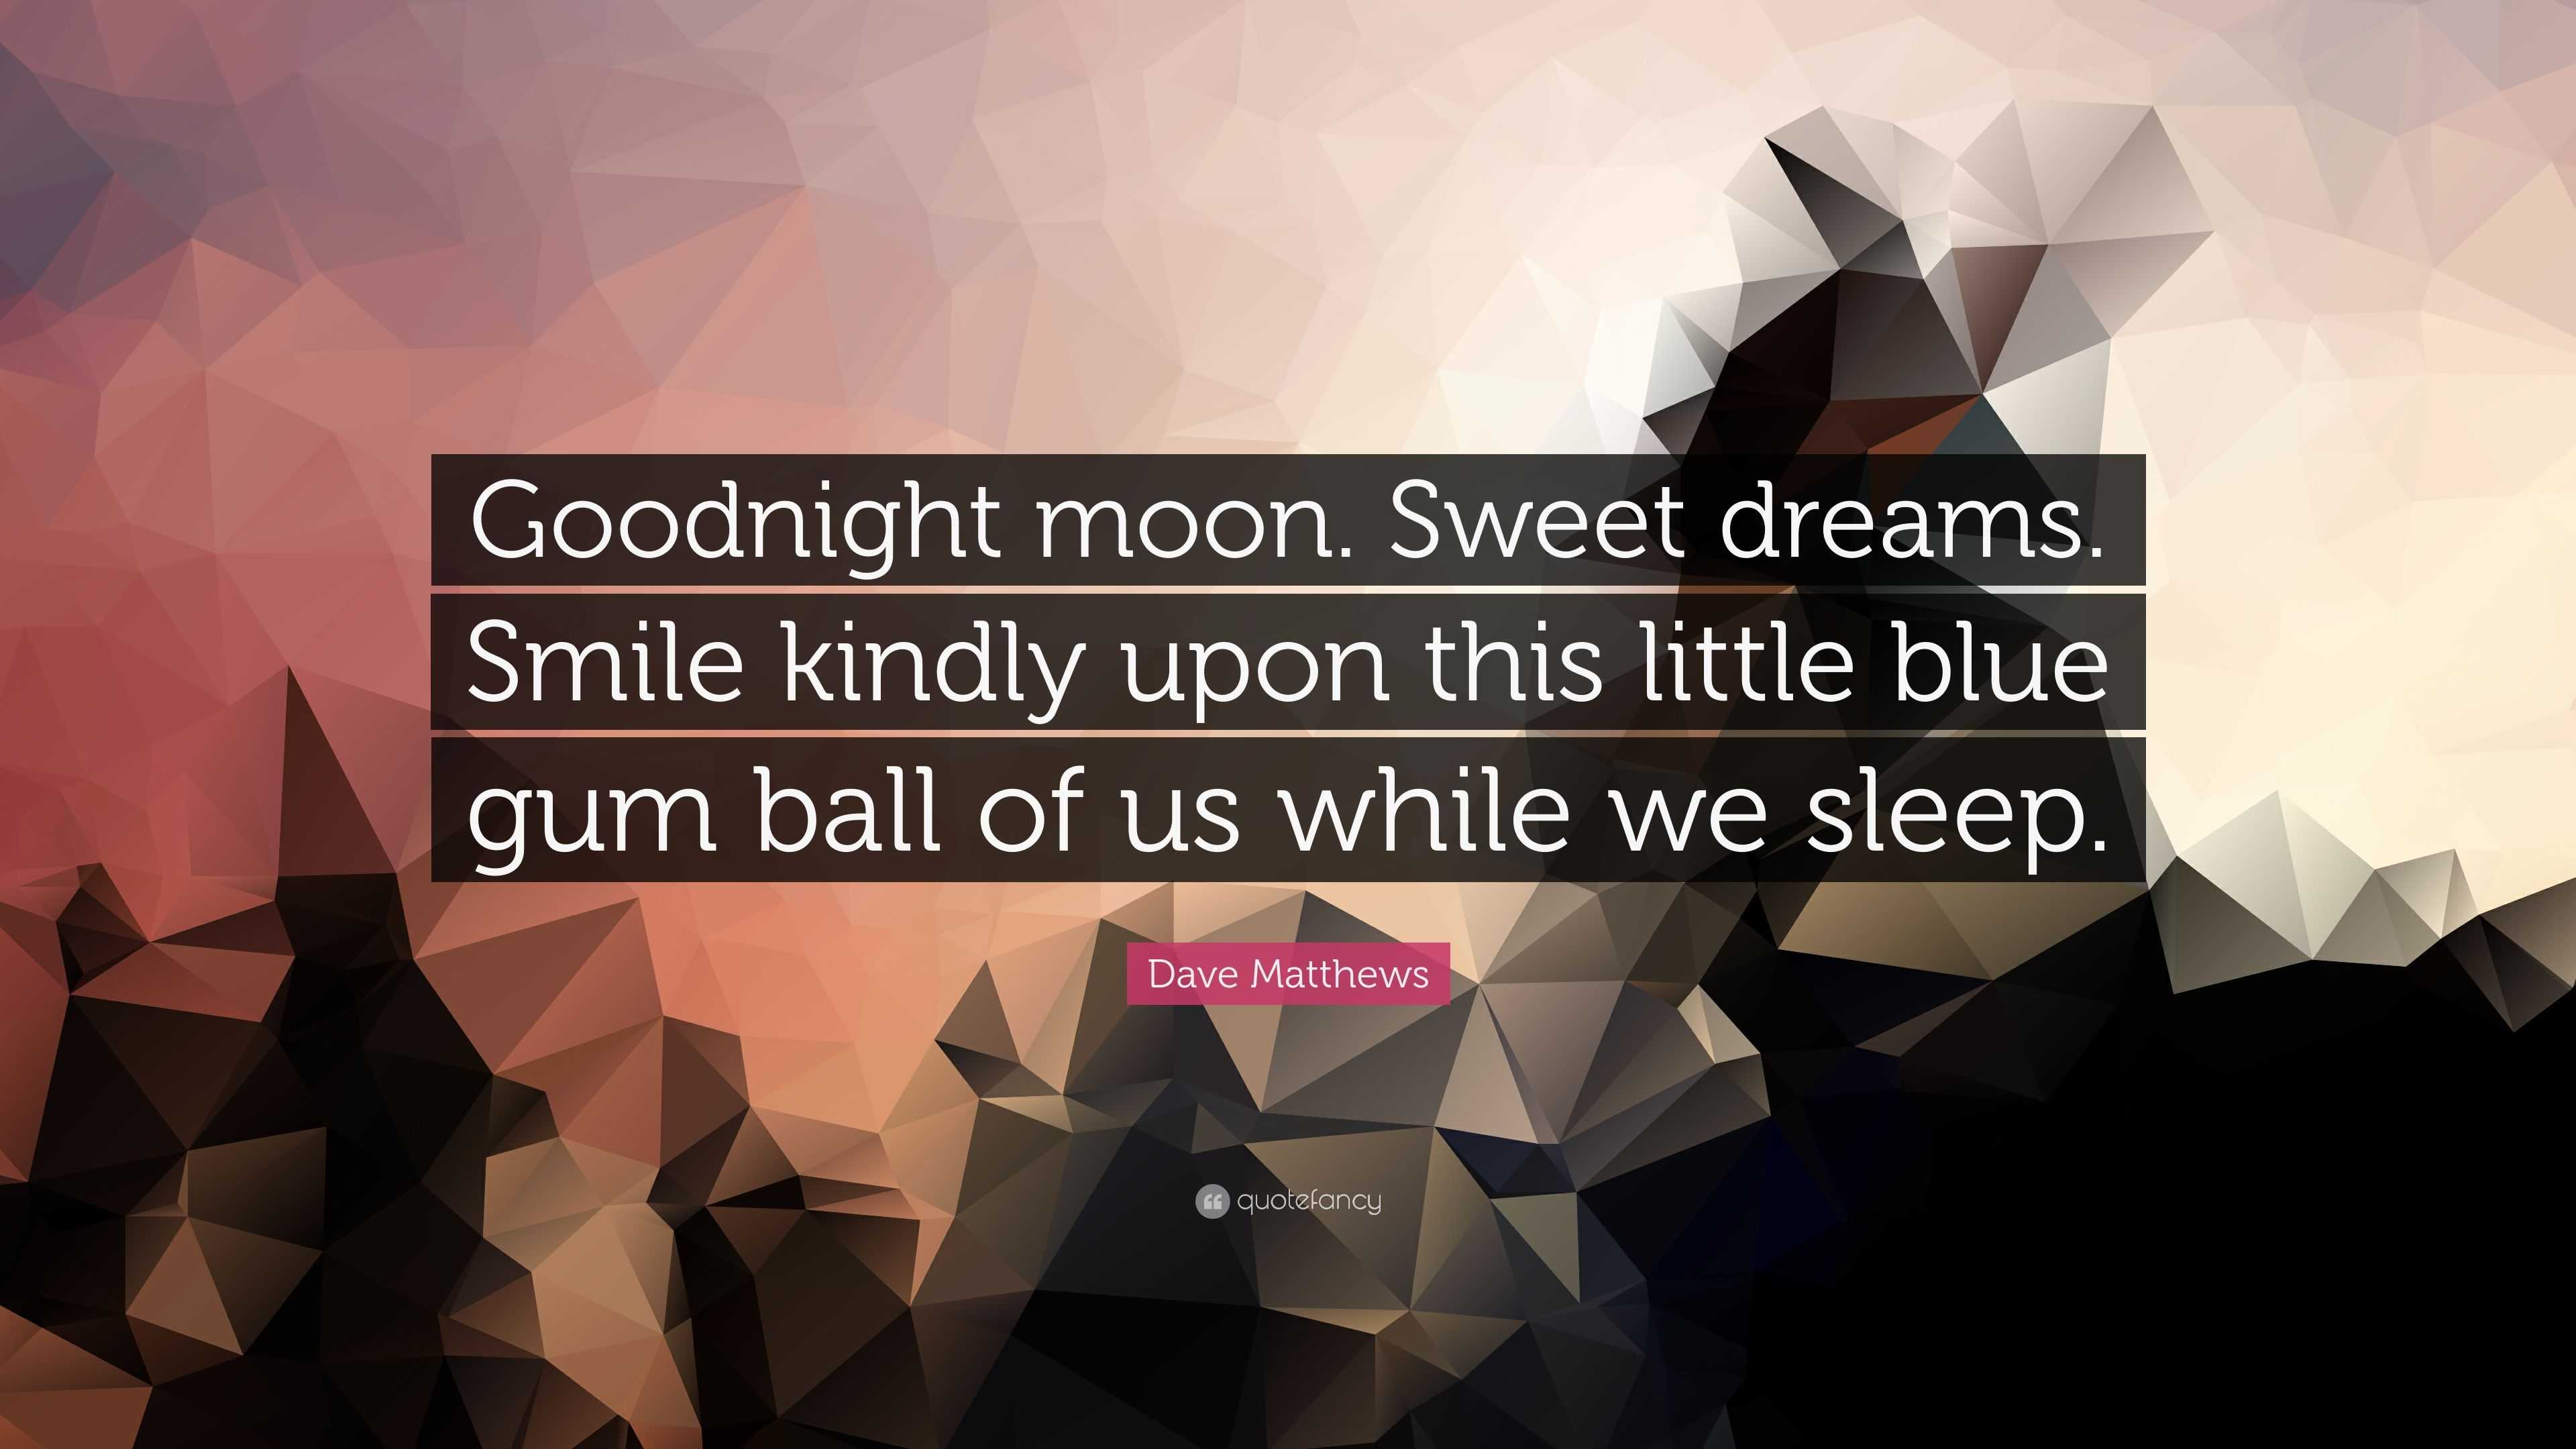 Dave Matthews Quote: “Goodnight moon. Sweet dreams. Smile kindly upon this  little blue gum ball of